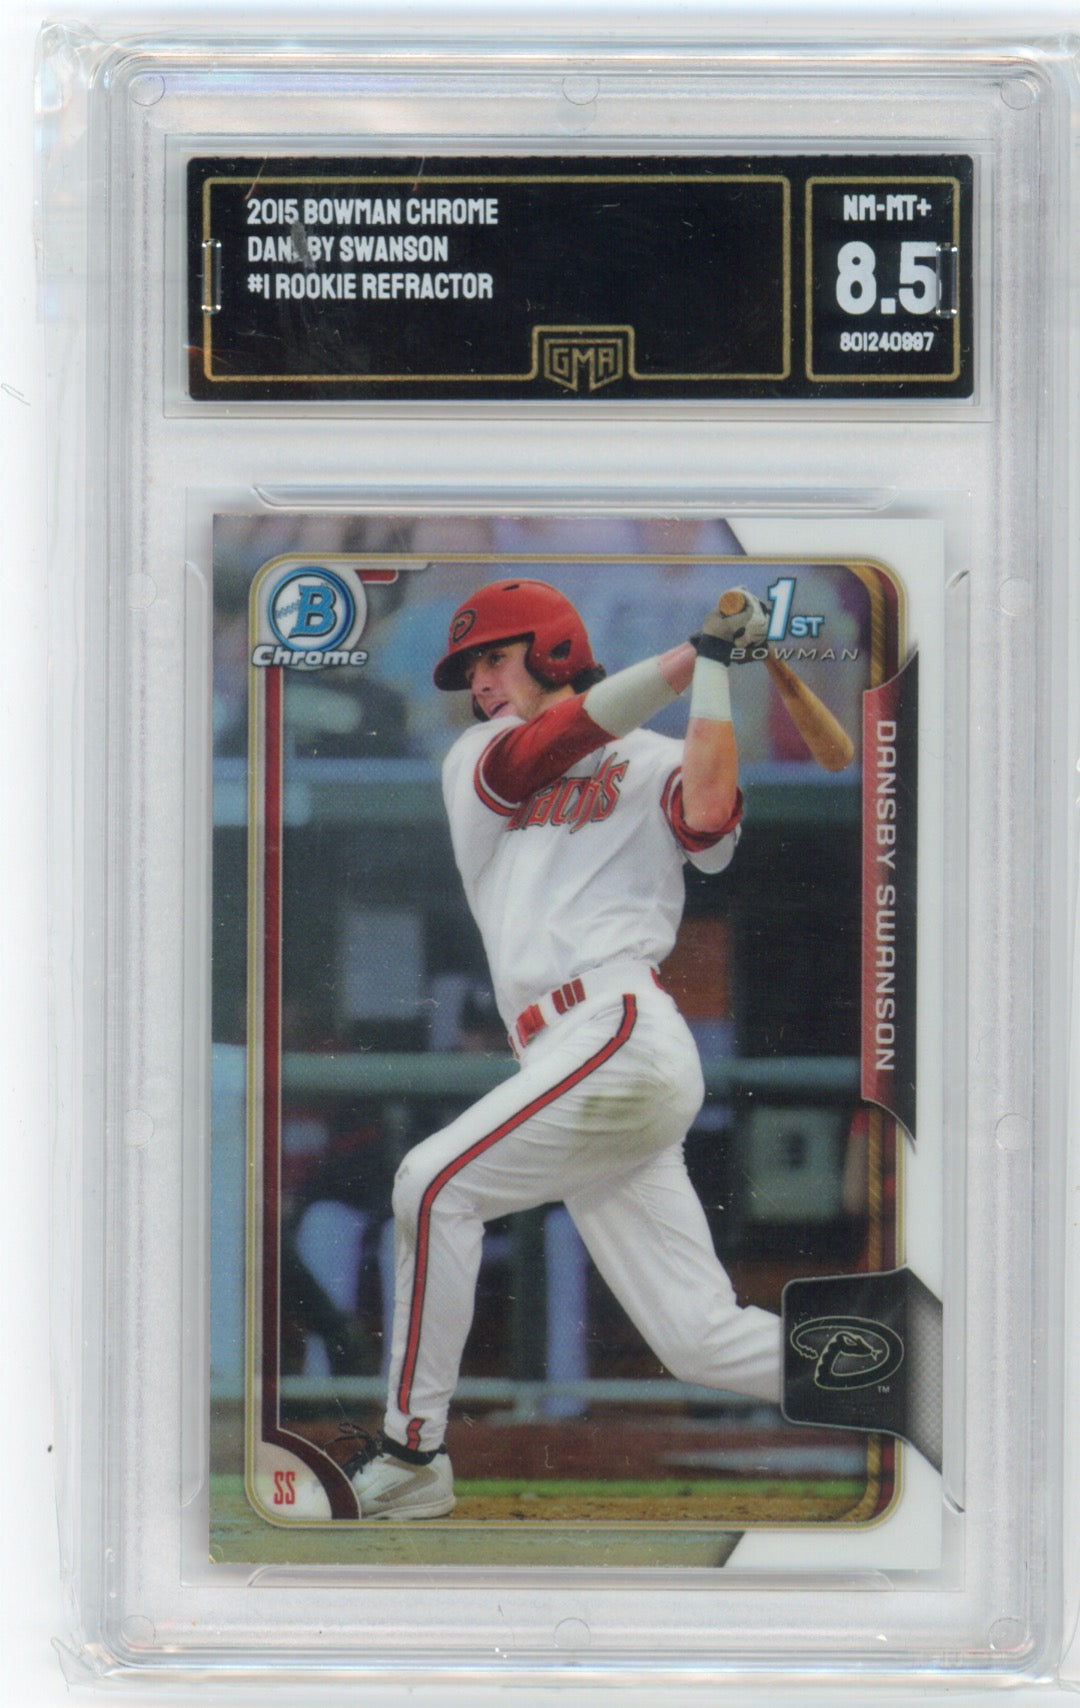 2015 Bowman Chrome Dansby Swanson #1 Rookie Refractor GMA 8.5